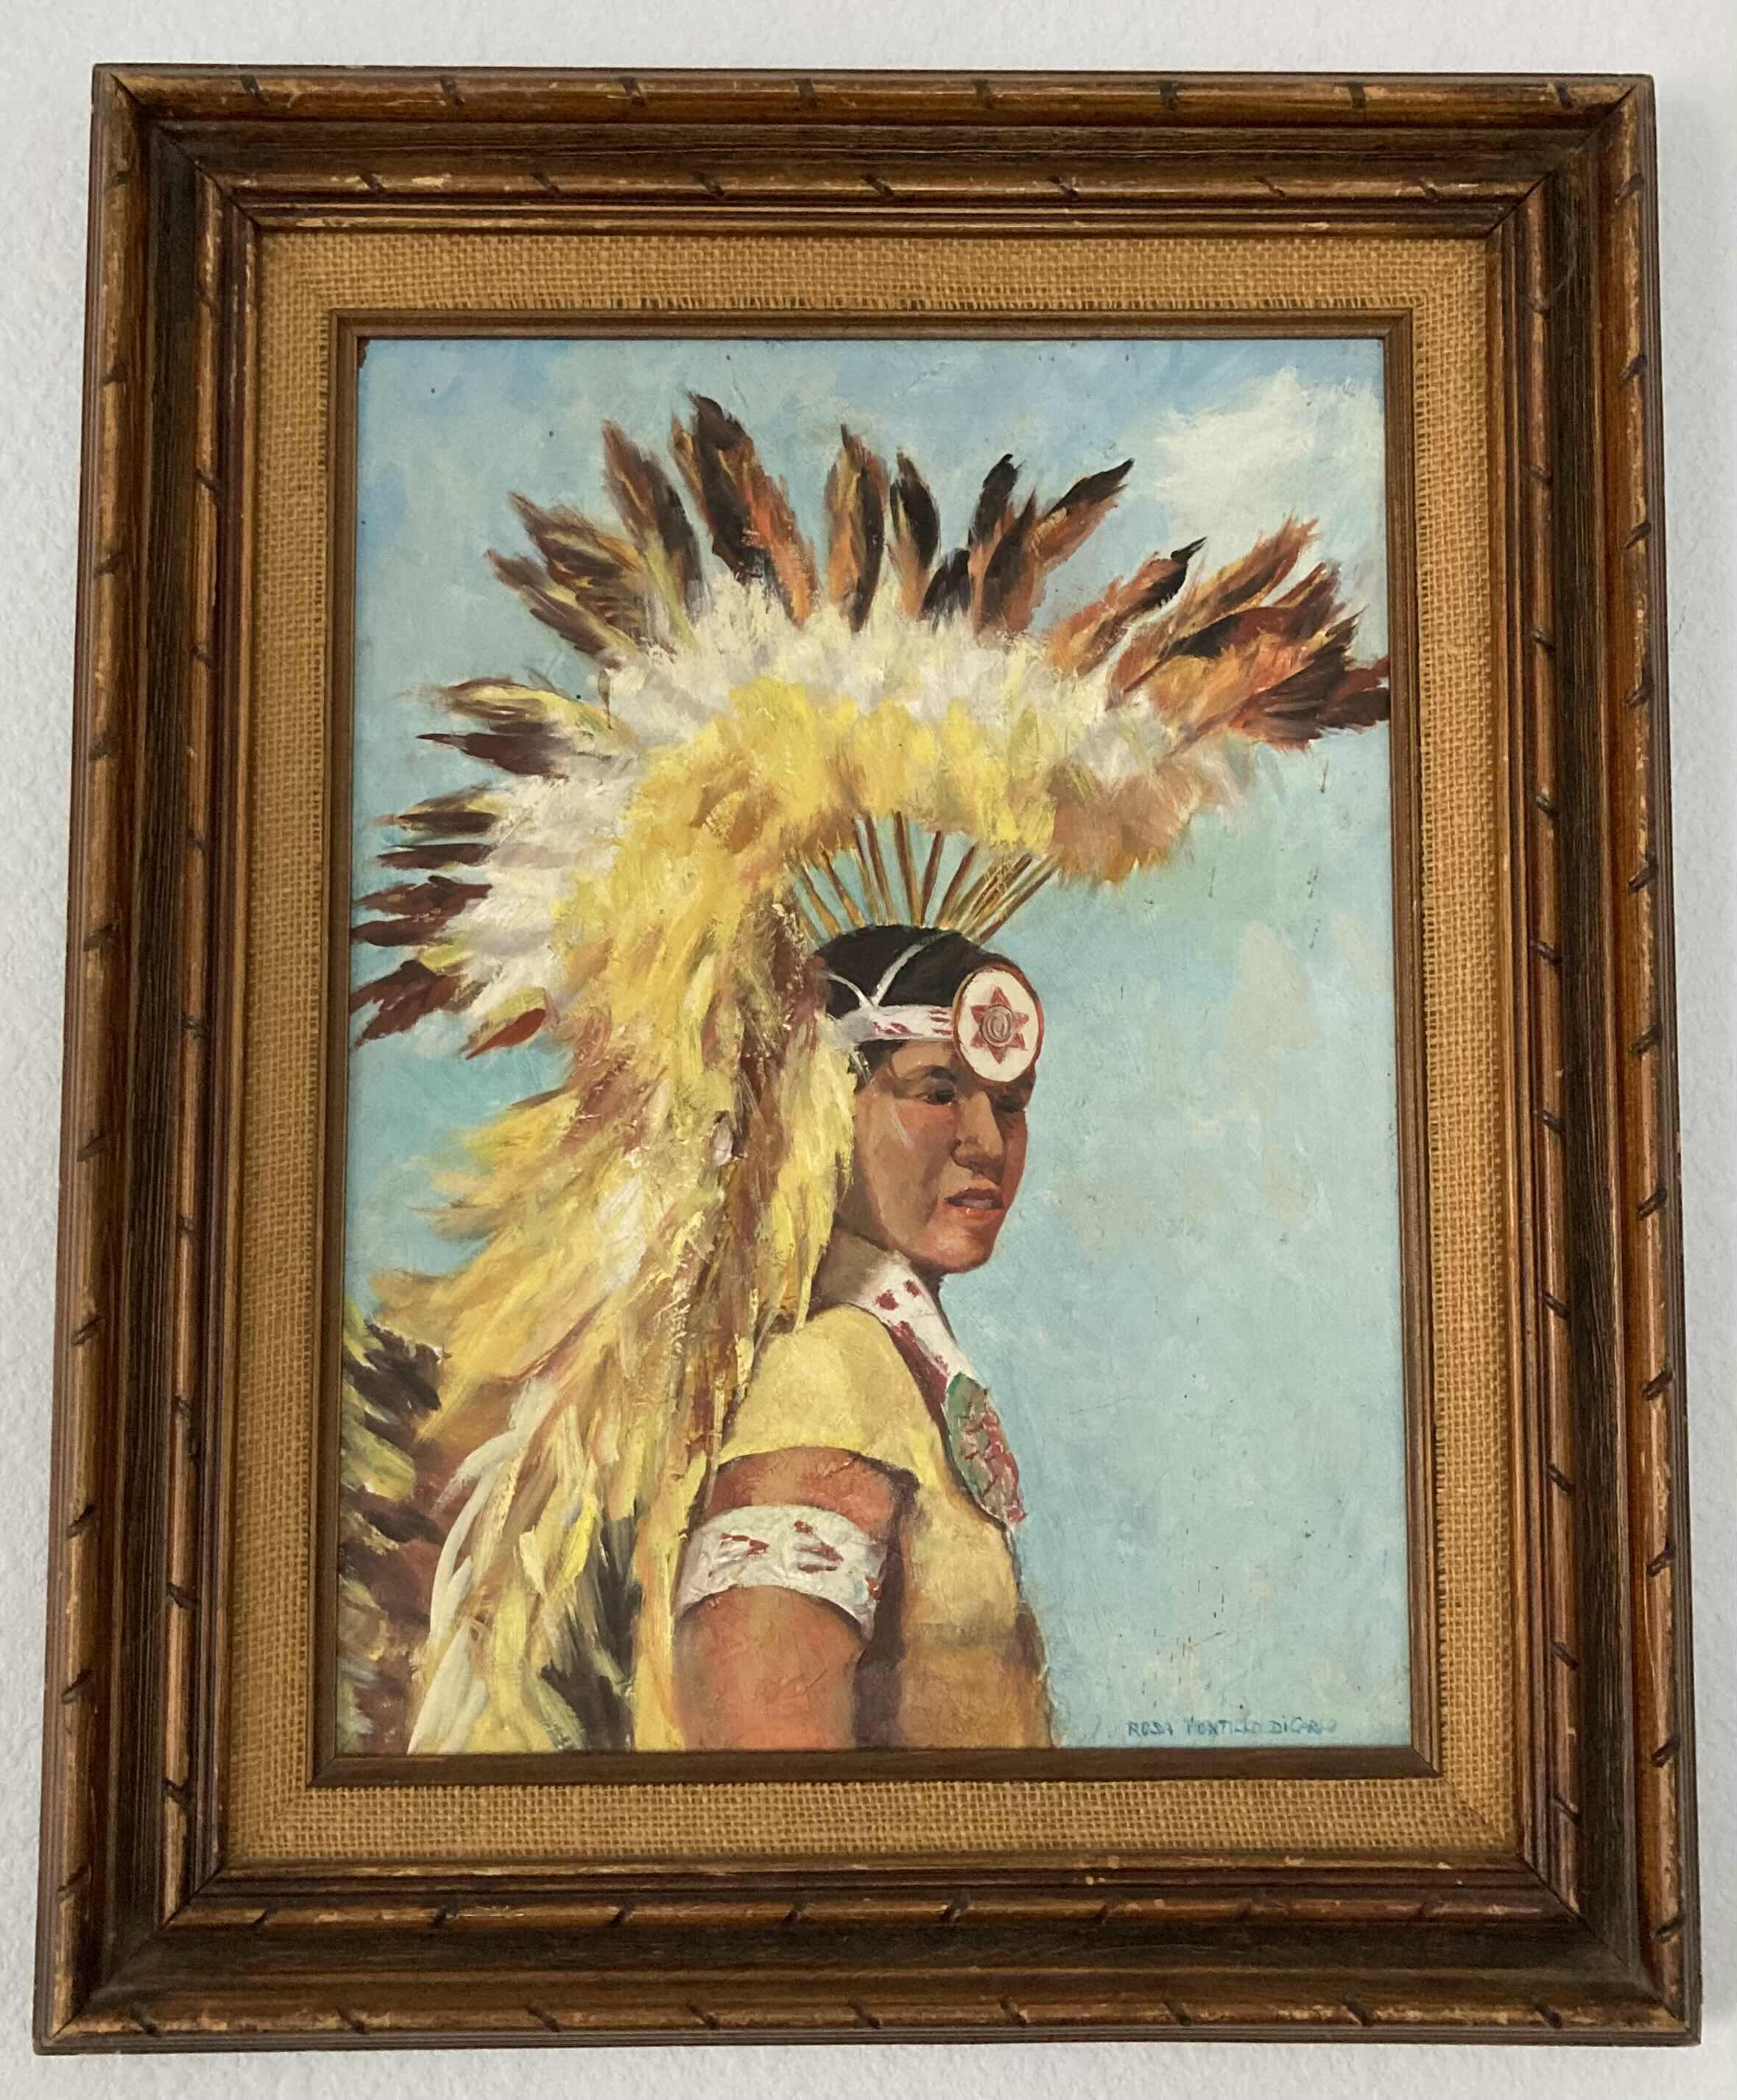 Photo 1 of NATIVE AMERICAN OIL PAINTING FRAMED ARTWORK SIGNED BY ROSA POMTILLO DICARIO 17.5” X 22”